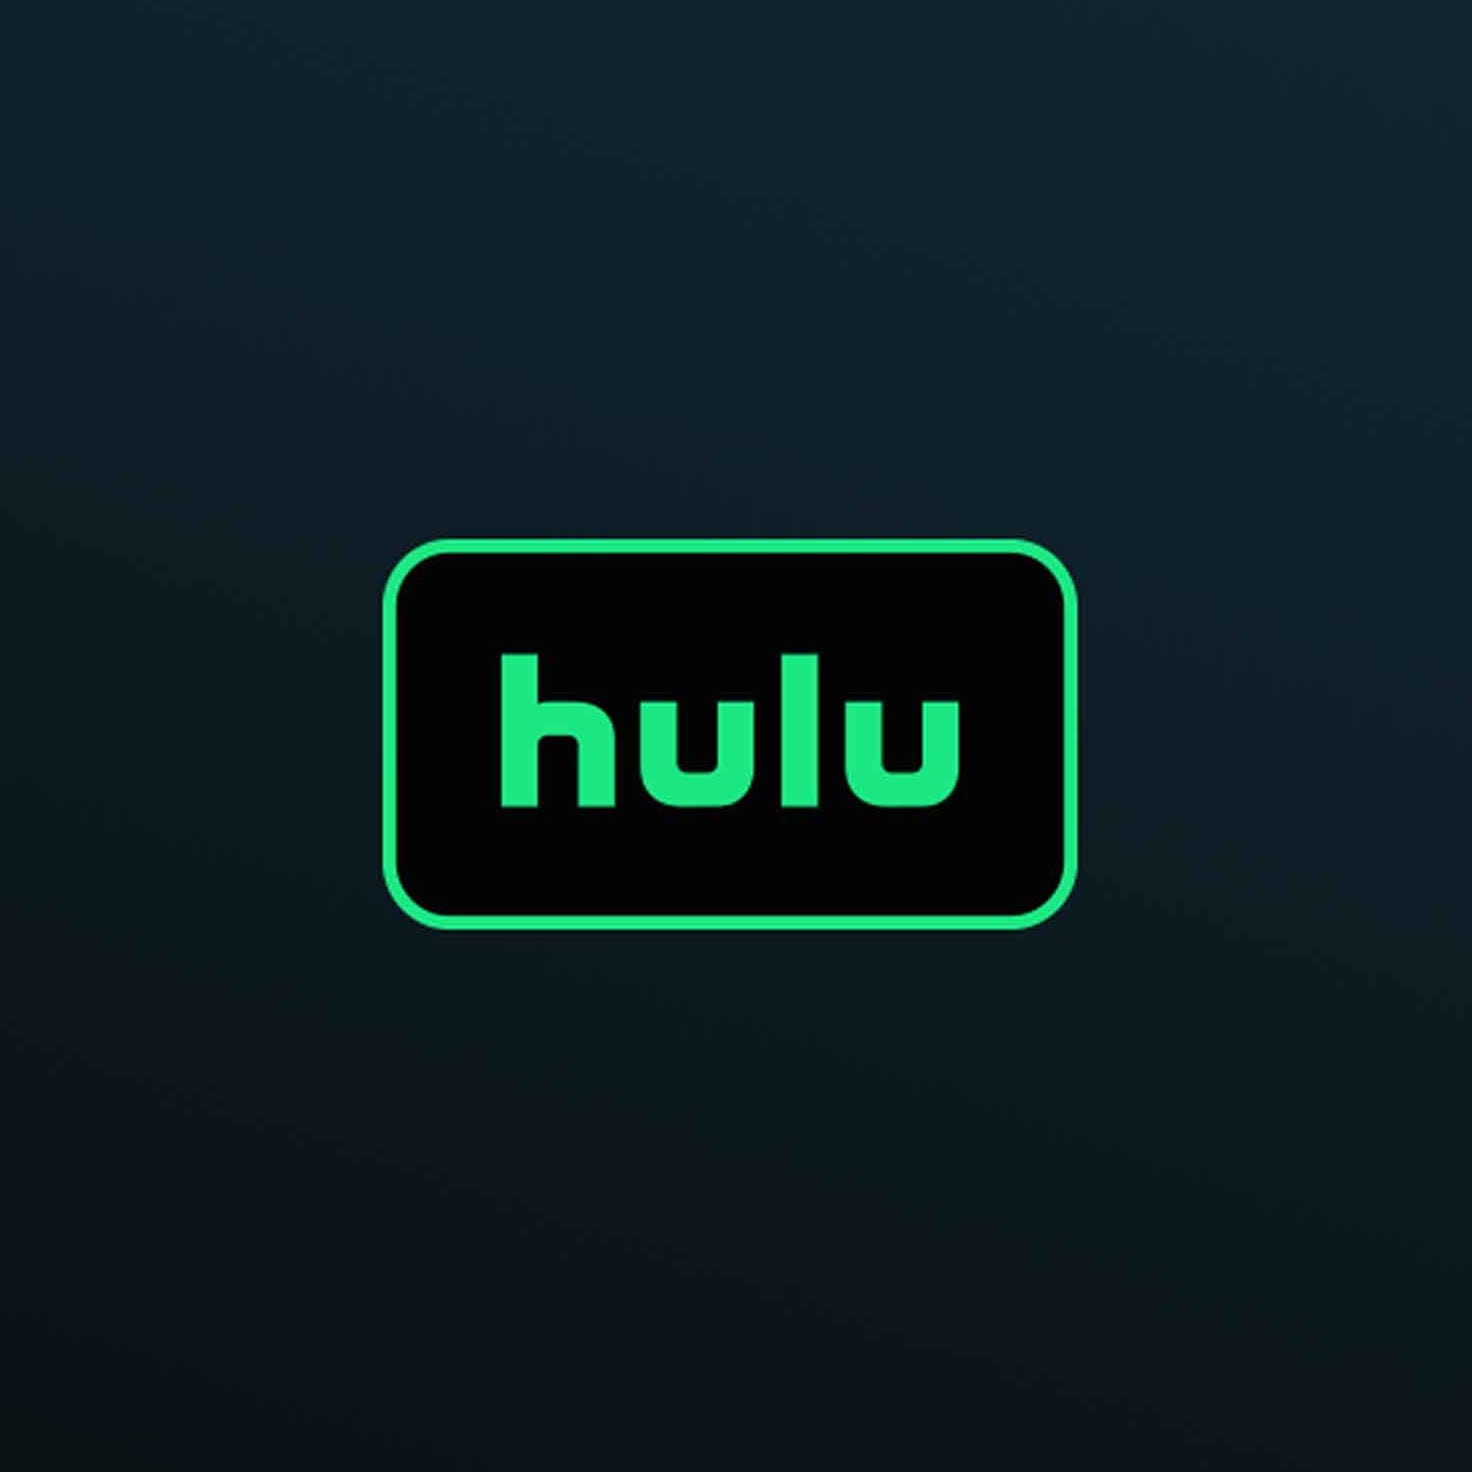 Get Hulu for just $2 per month for three months with this National Streaming Day deal.